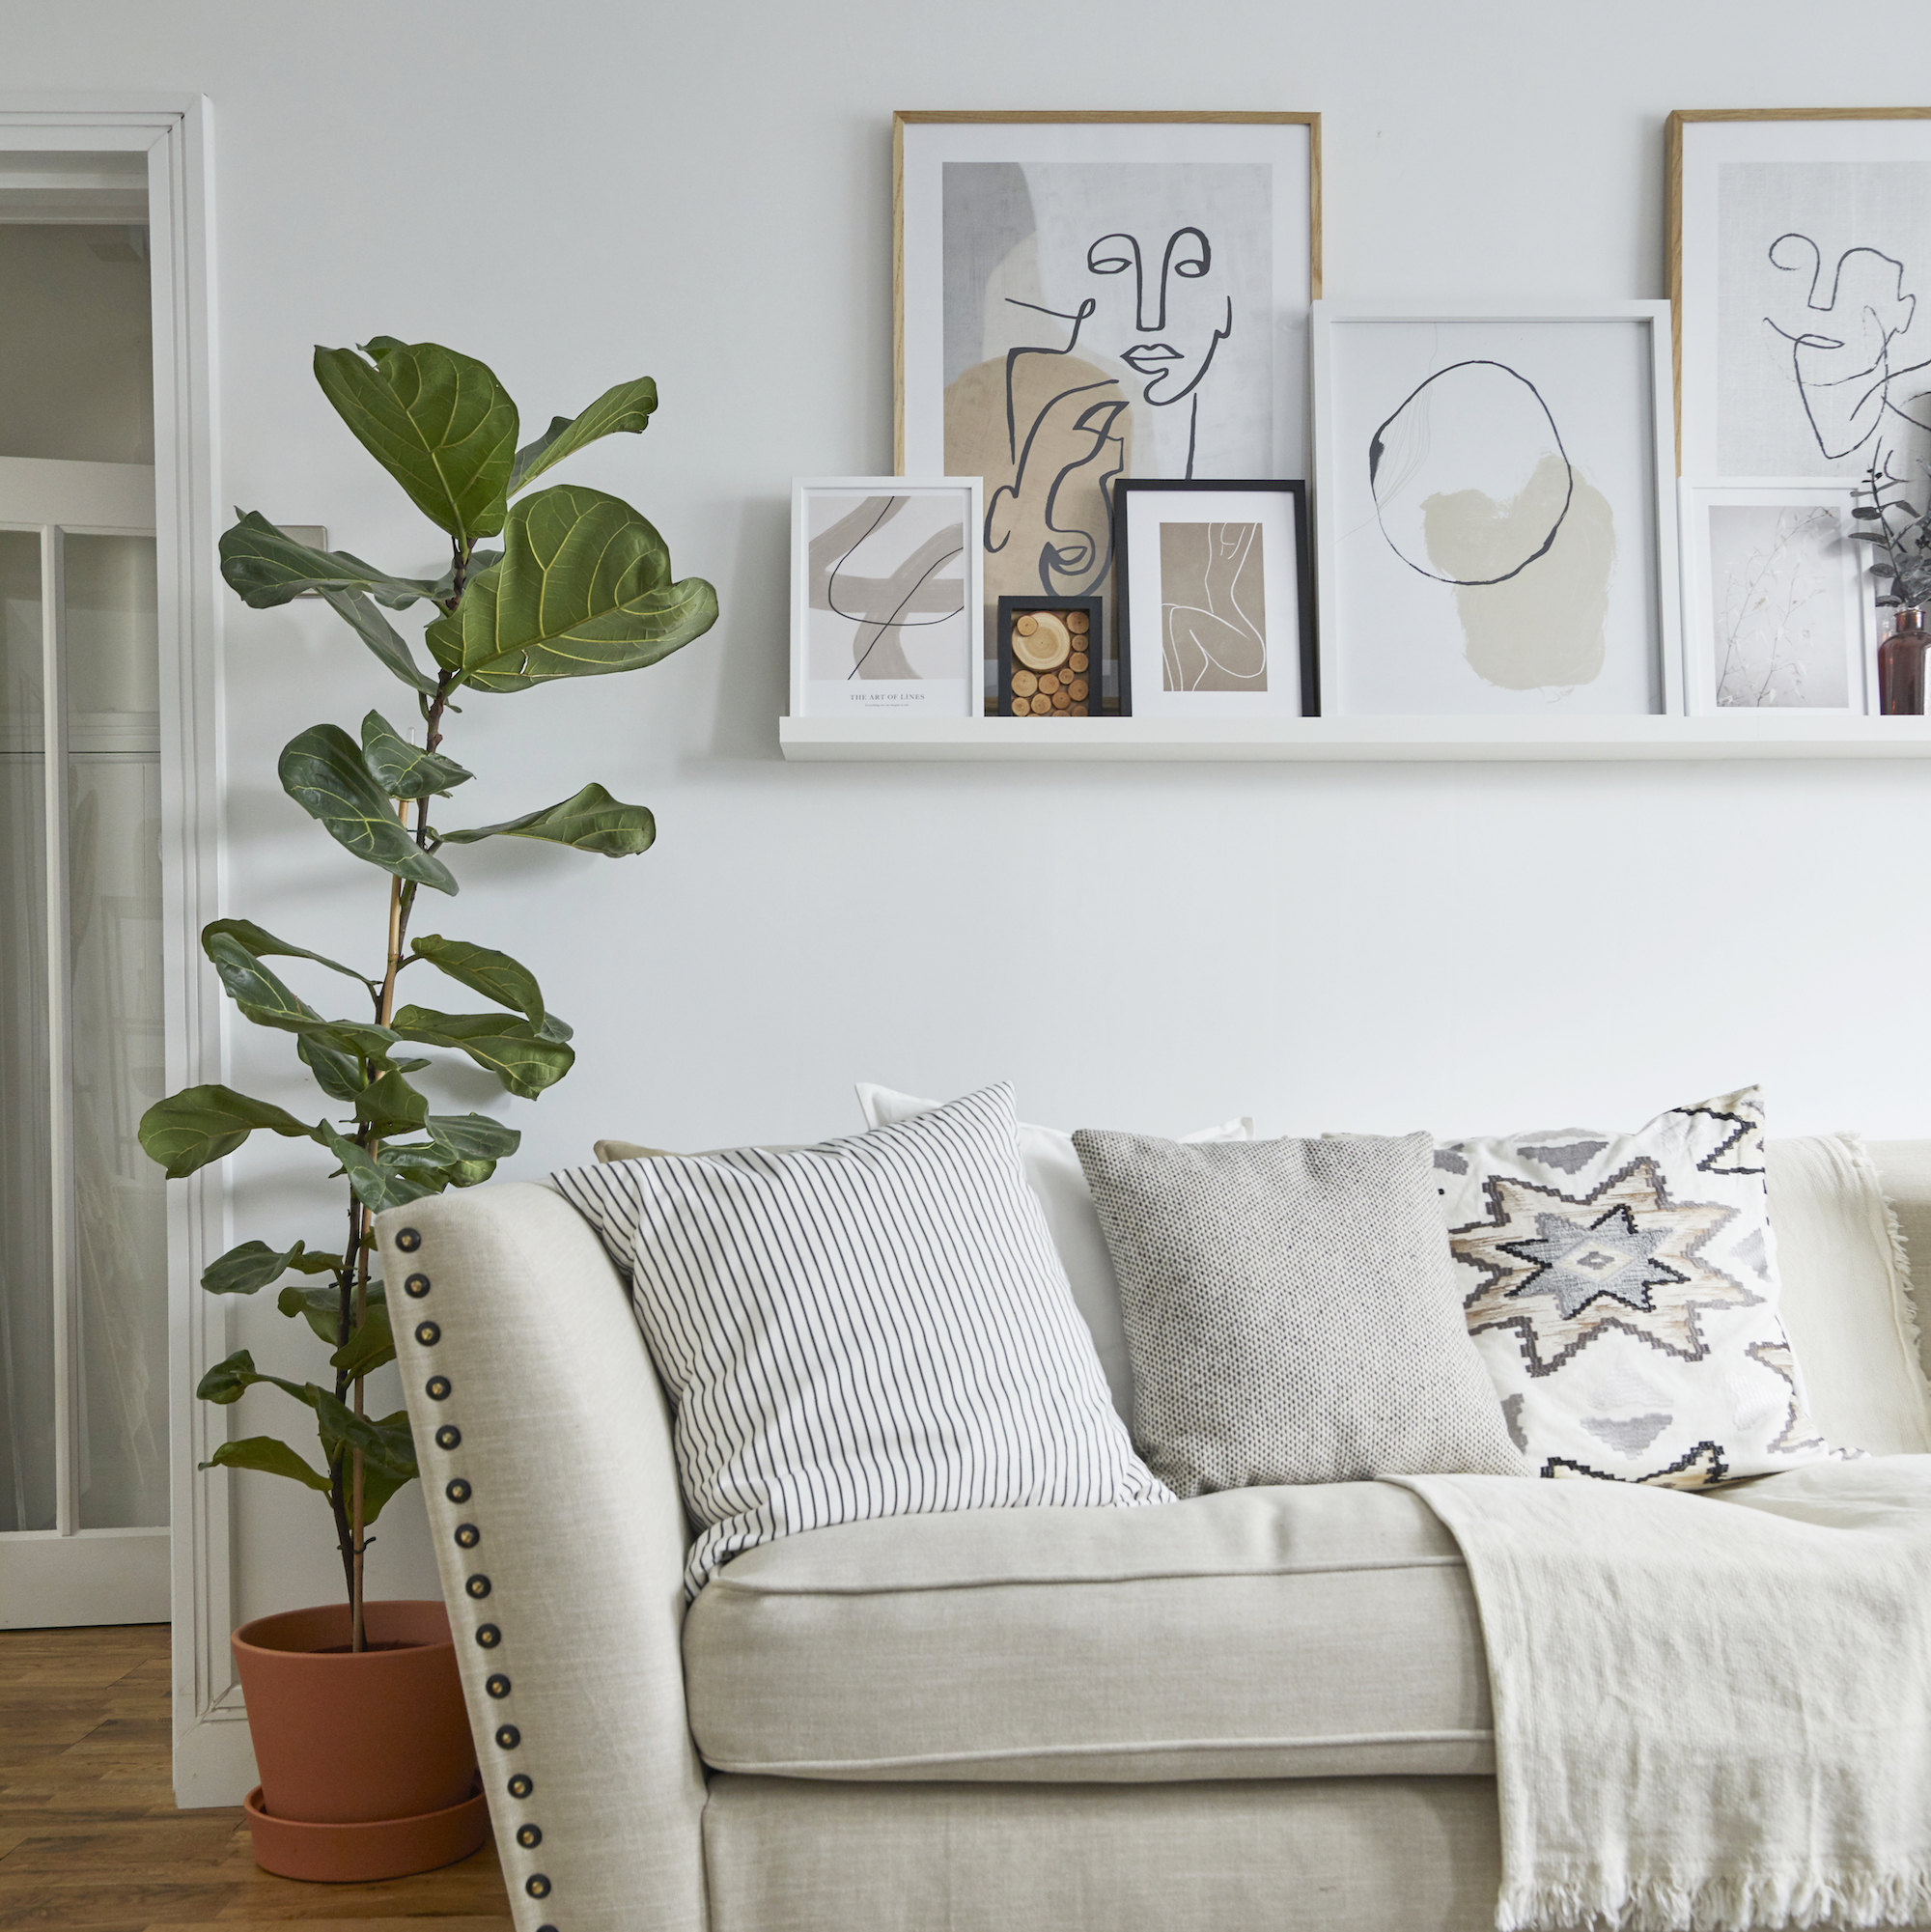 Living room wall art ideas - 10 ways to display prints and paintings